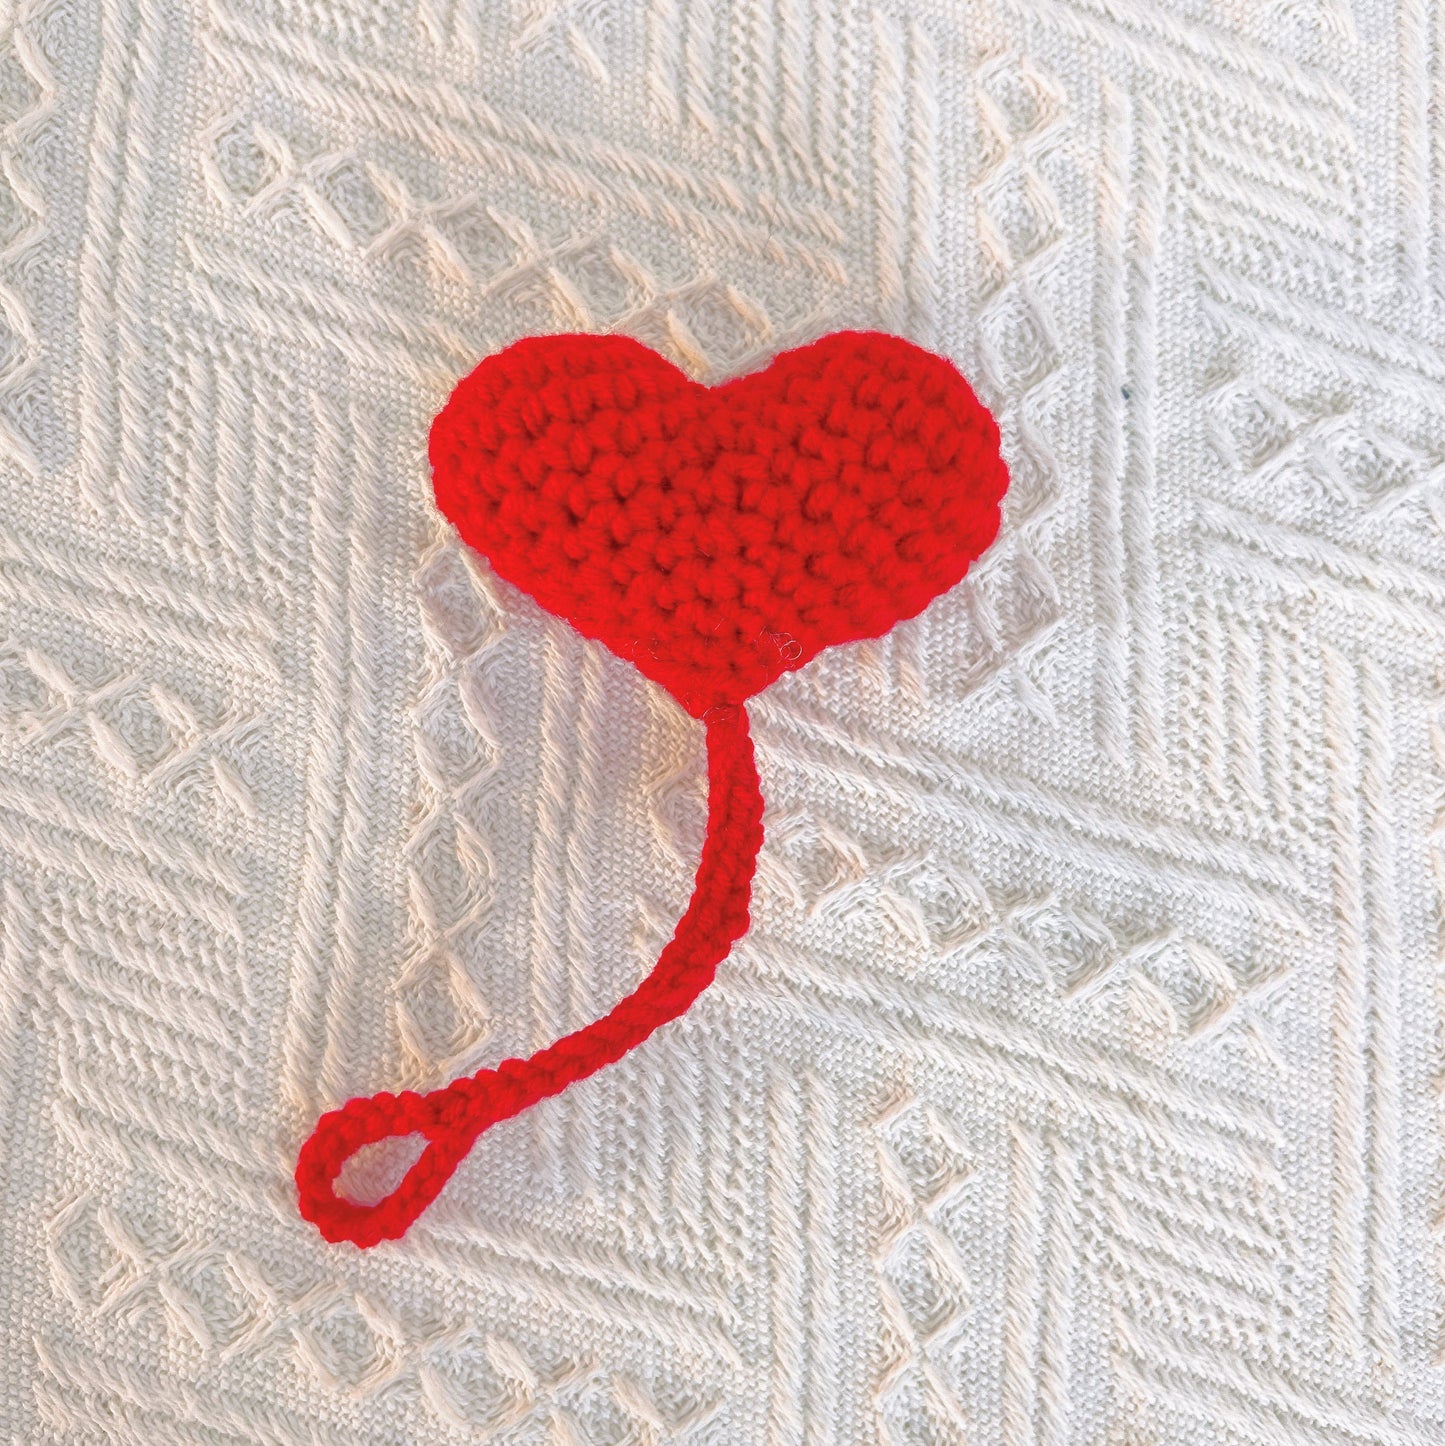 Crochet Sprout Leaf Accessory - Easter Bunny Ear Valentine's Heart Gift